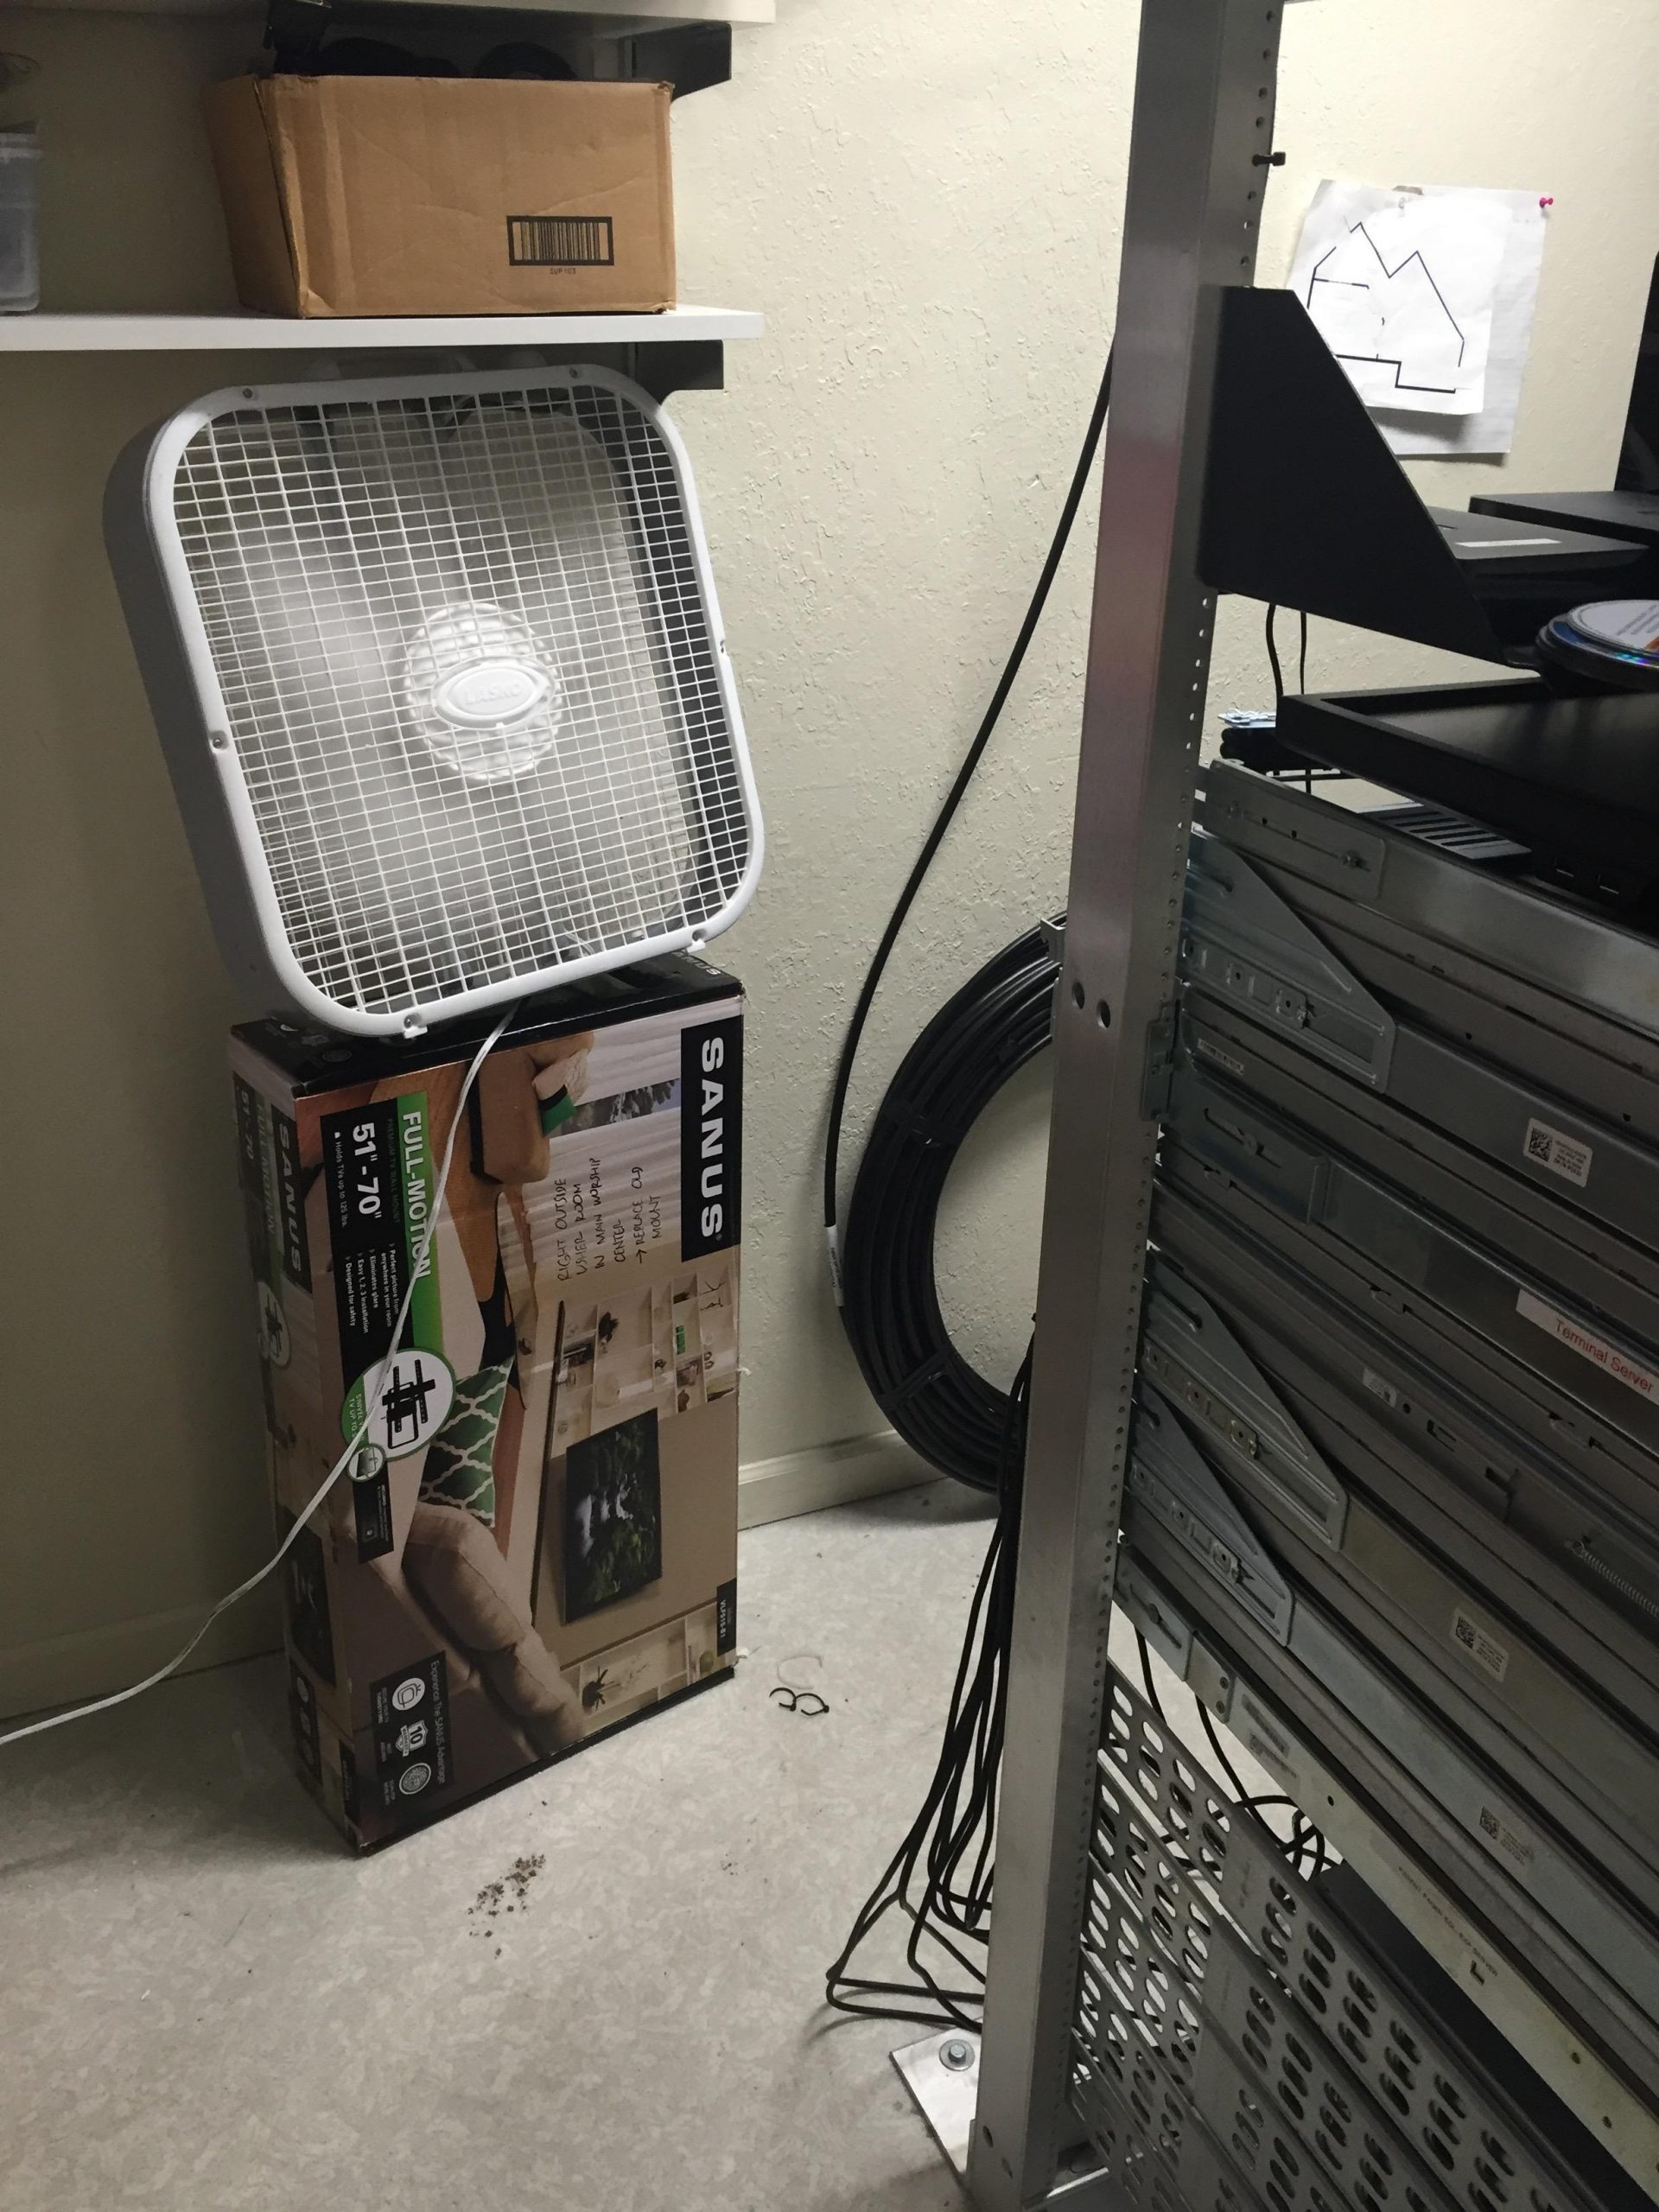 Server Room Overheating Throw A Fan In No Big Deal in proportions 2448 X 3264